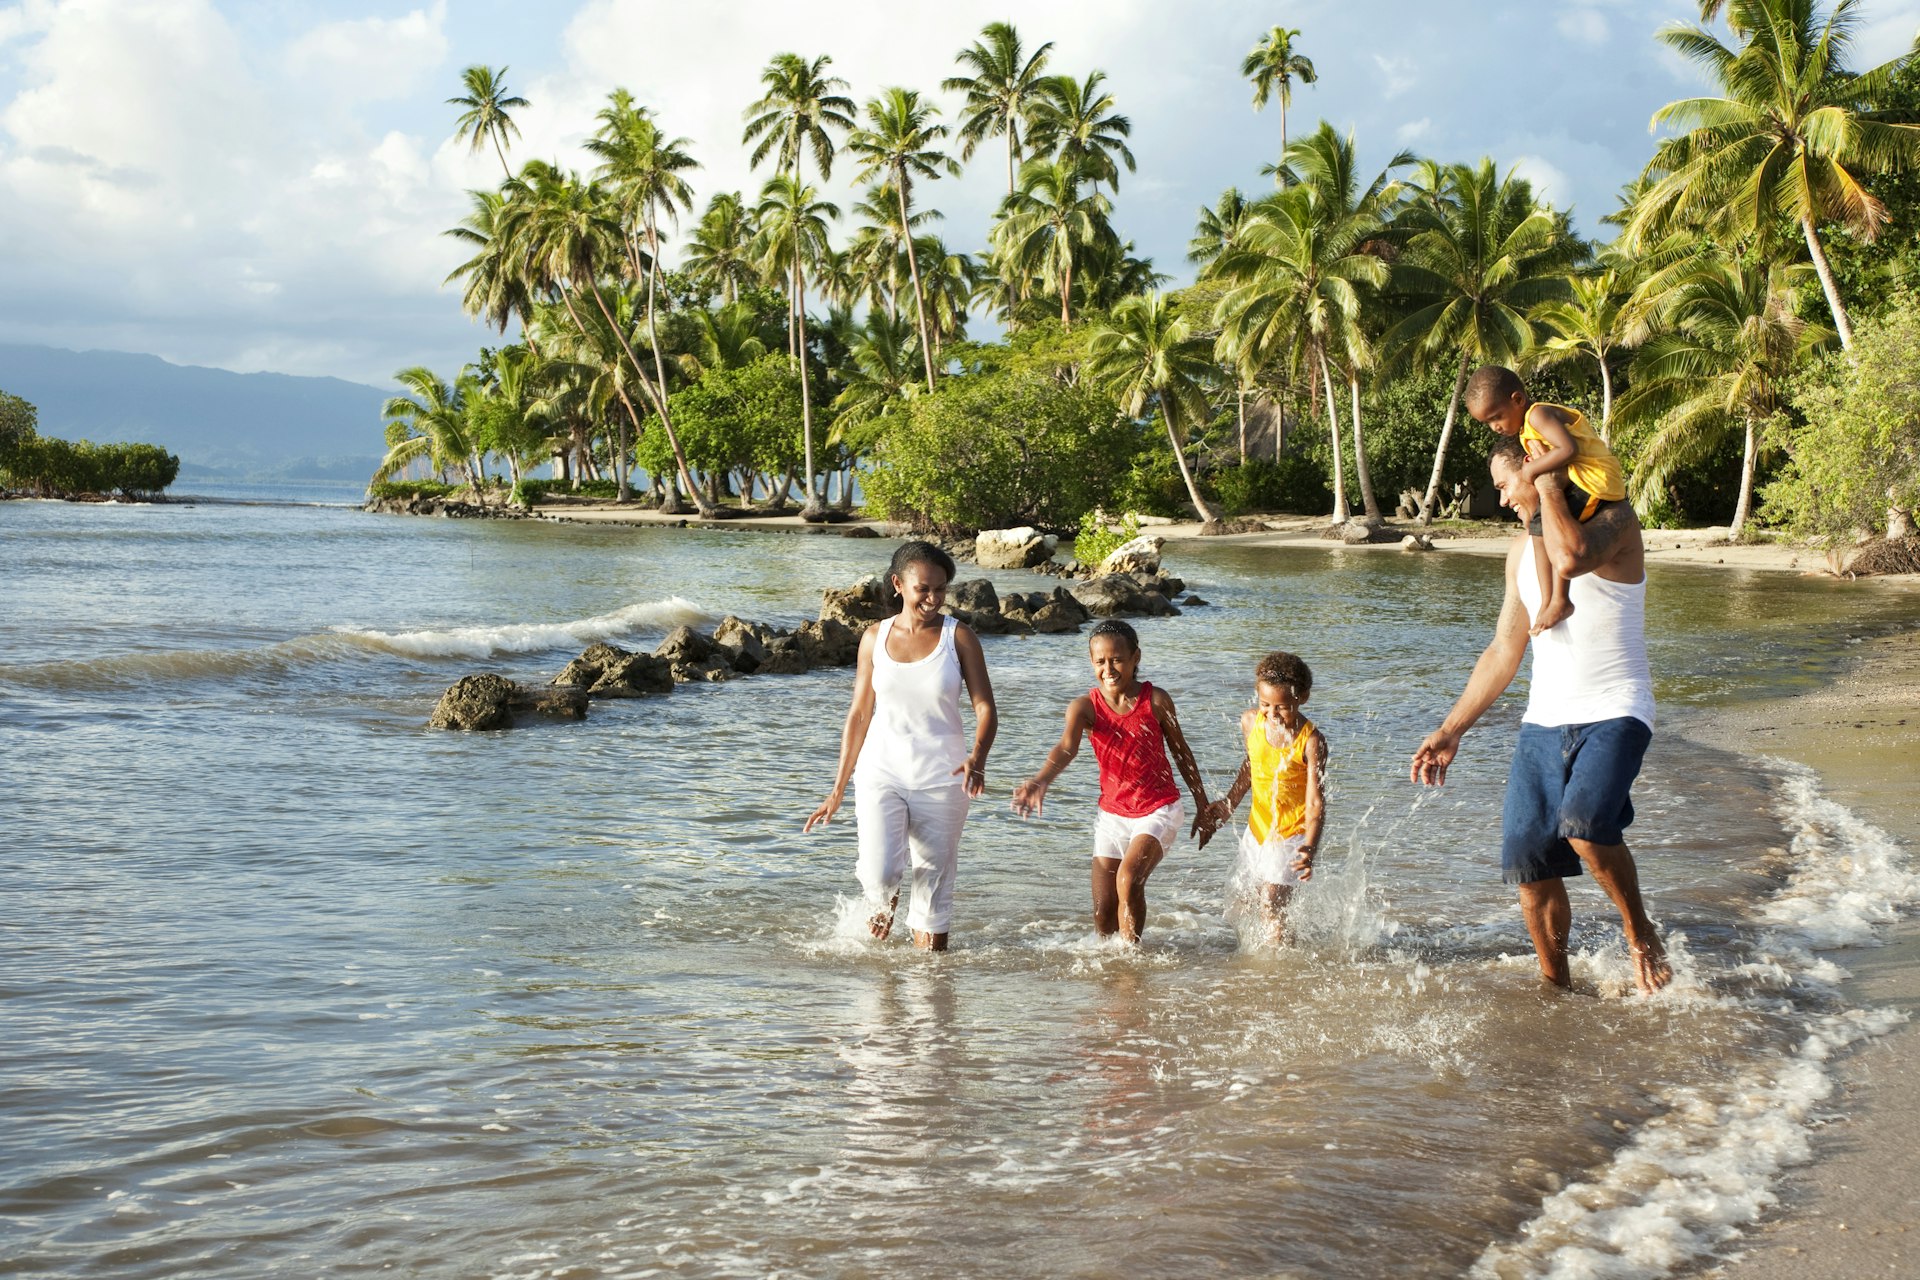 A smiling Fijian family of three kids and a mum and dad playing in the sea on a white-sand beach with palm trees behind them on Fiji's Vanua Levu